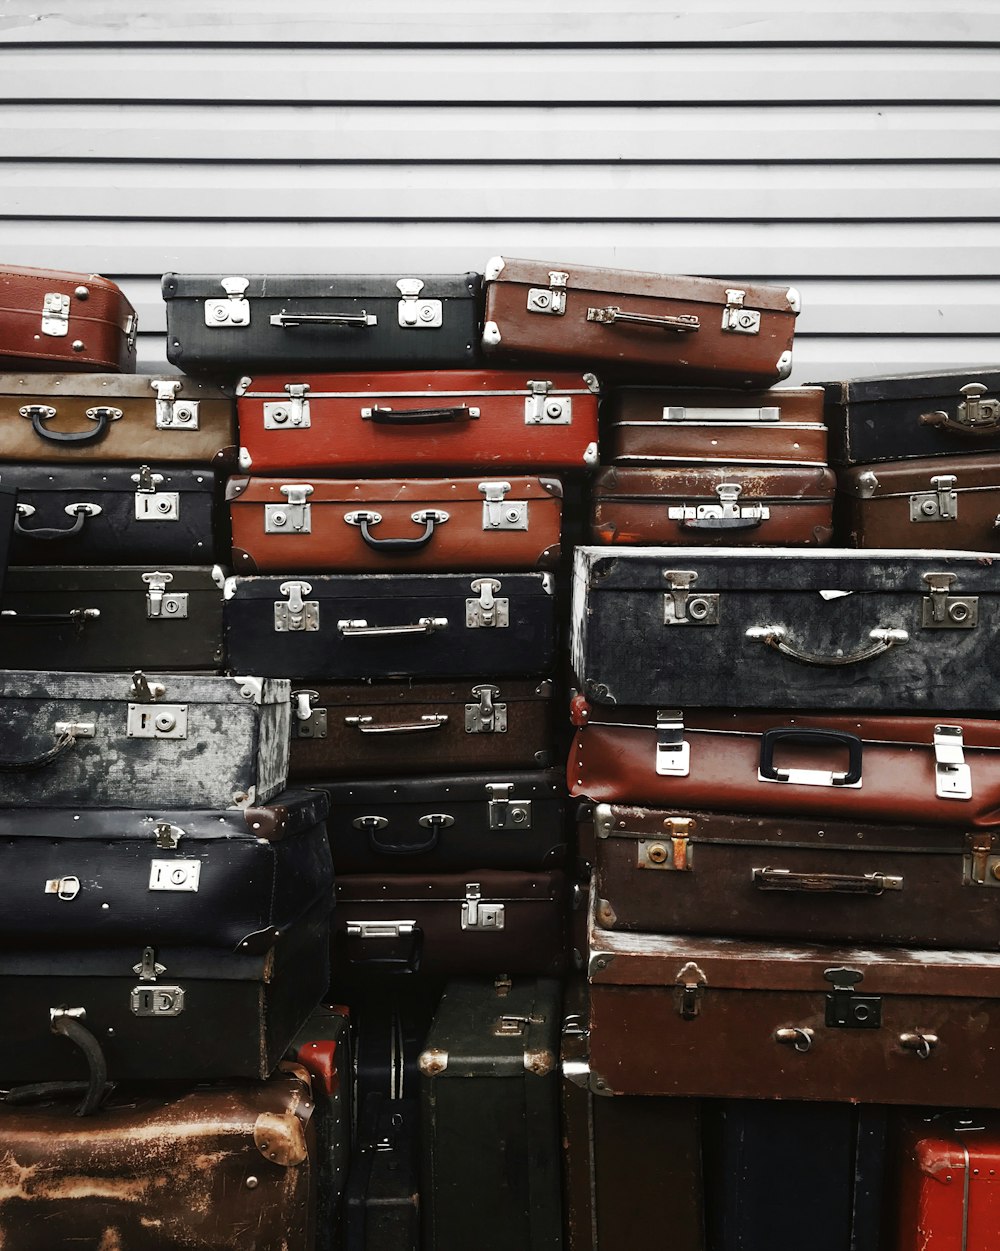 stacks of assorted suitcases